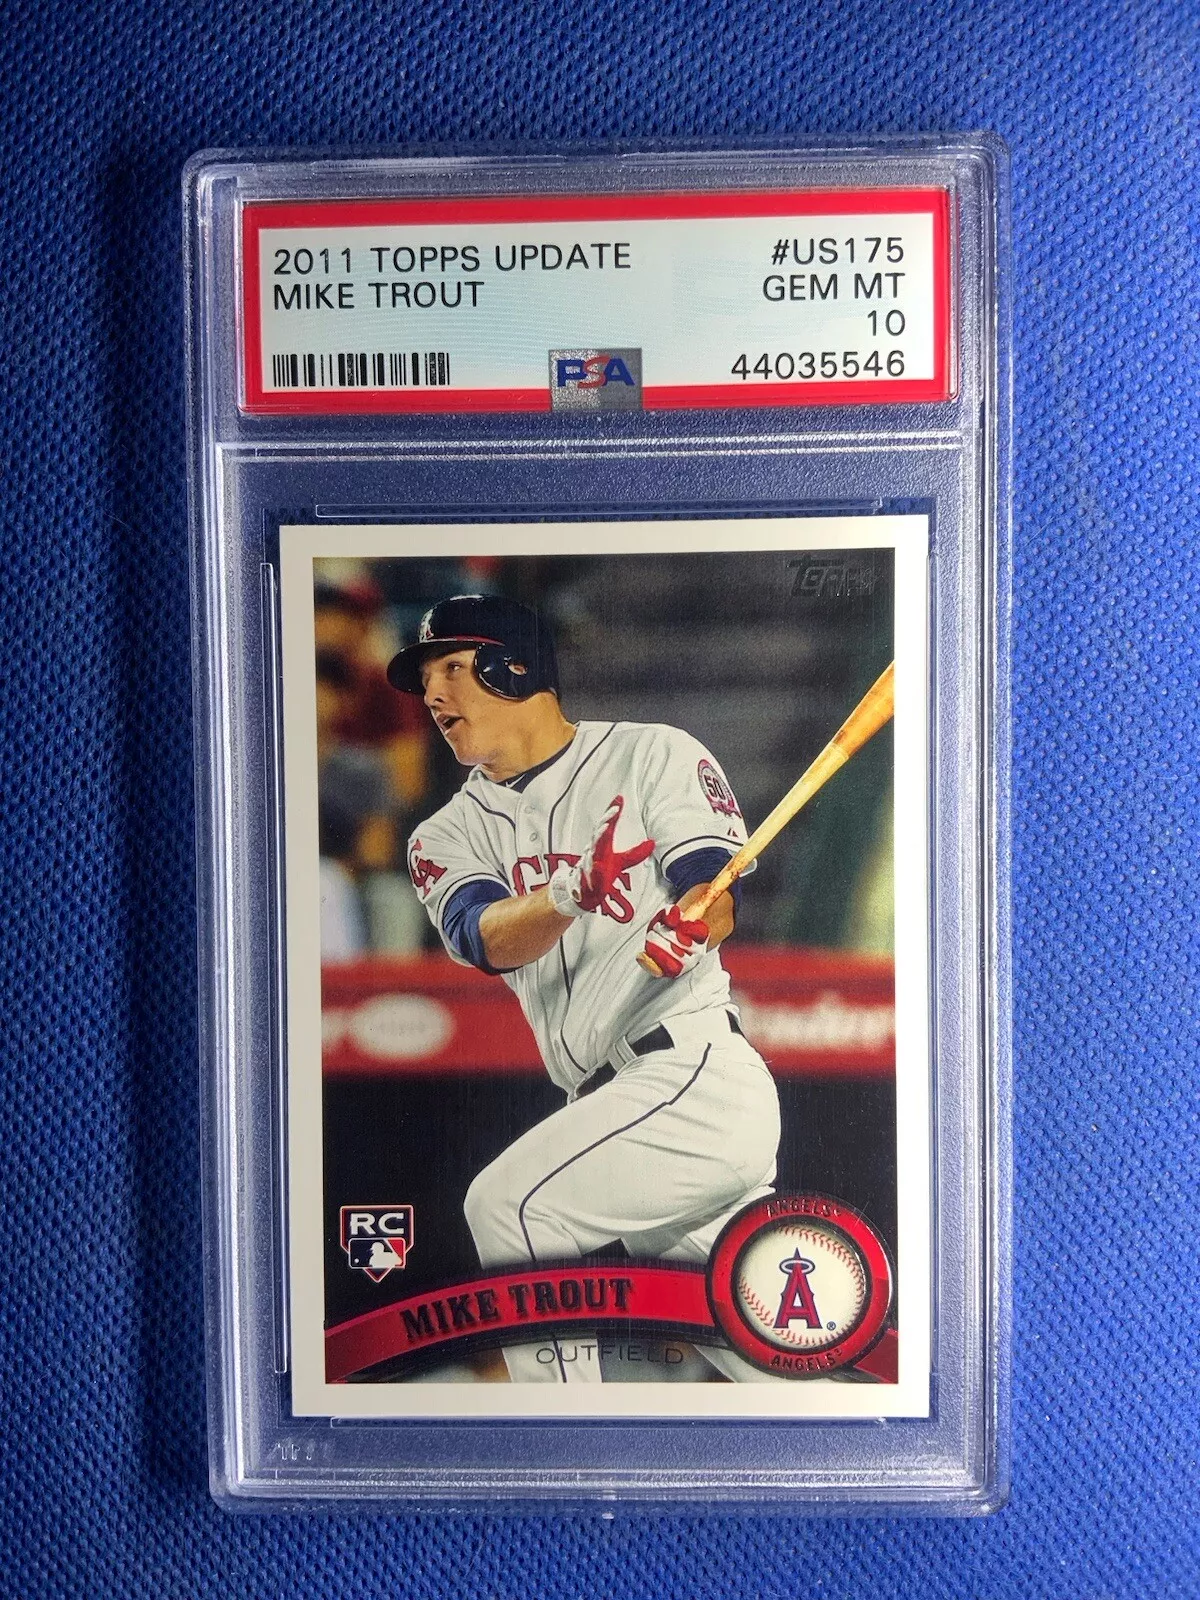 2011 Topps Update Mike Trout PSA 10 Gem Mint Rookie RC #US175